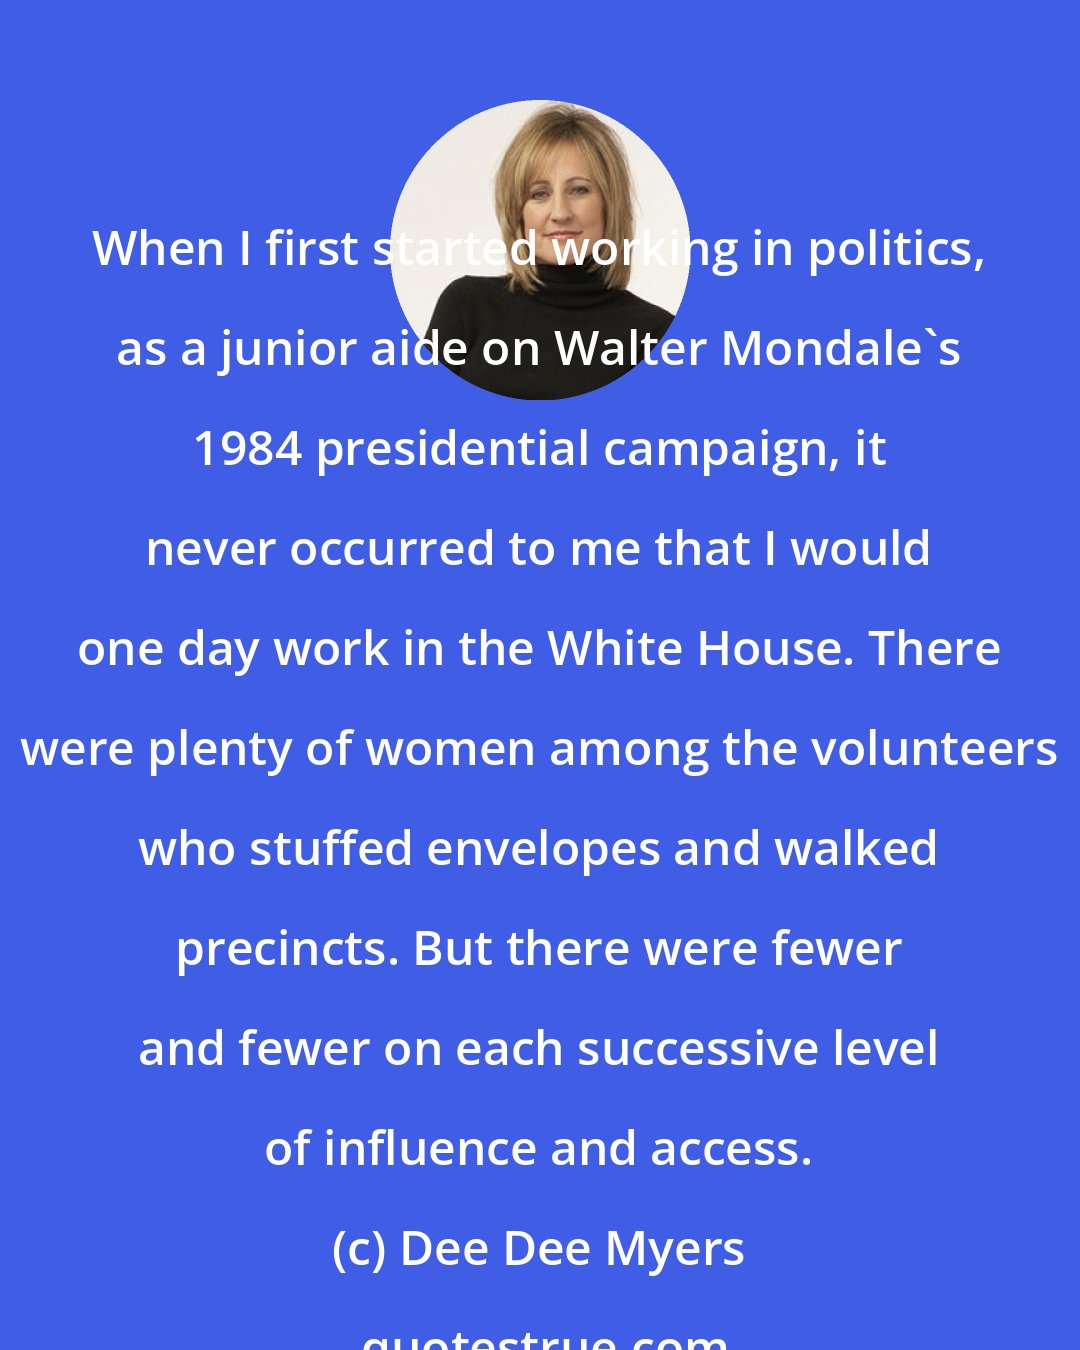 Dee Dee Myers: When I first started working in politics, as a junior aide on Walter Mondale's 1984 presidential campaign, it never occurred to me that I would one day work in the White House. There were plenty of women among the volunteers who stuffed envelopes and walked precincts. But there were fewer and fewer on each successive level of influence and access.